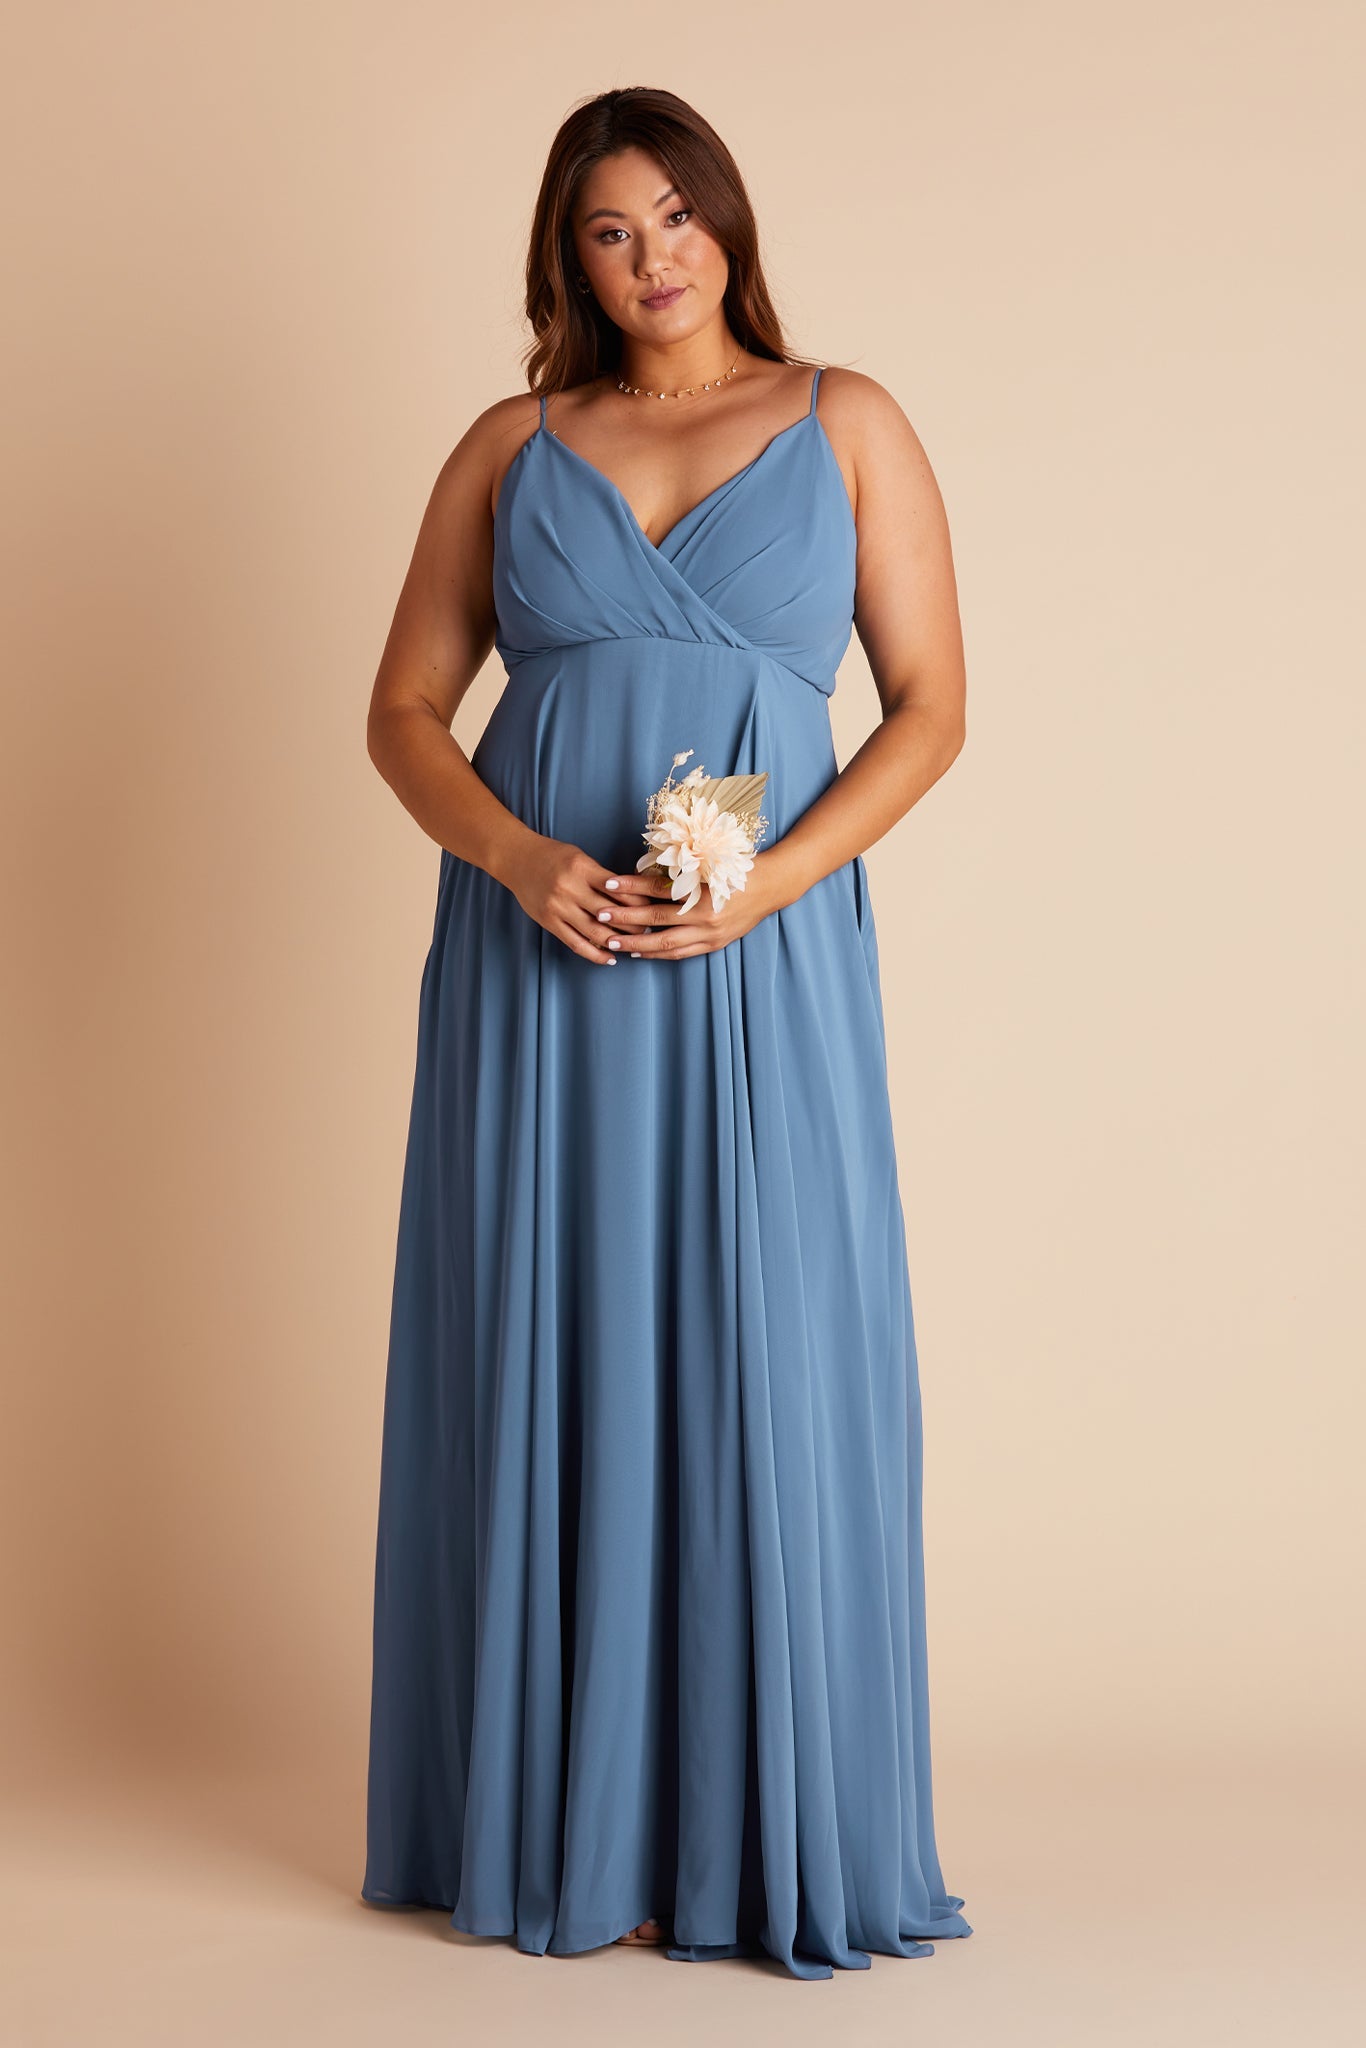 Kaia plus size bridesmaids dress in twilight blue chiffon by Birdy Grey, front view